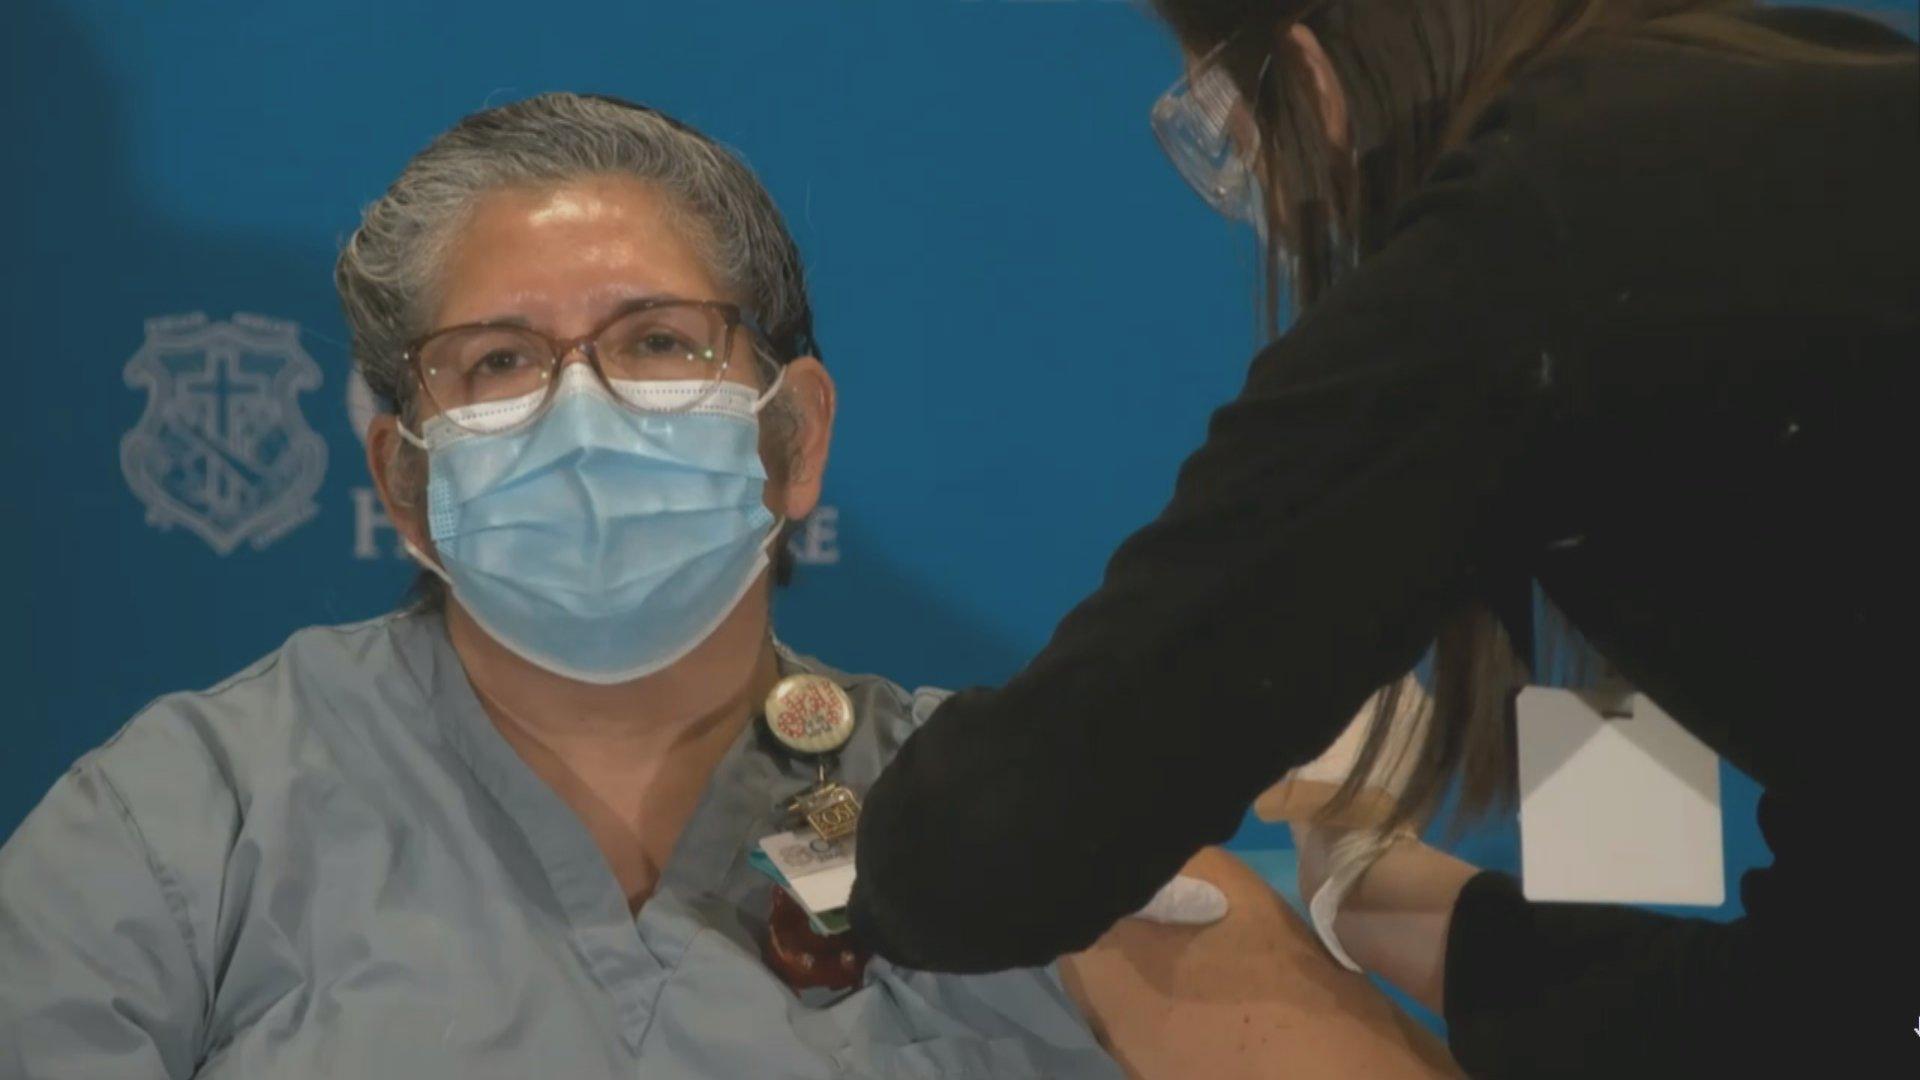 A health care worker gets the COVID-19 vaccine in Peoria, Illinois on Tuesday, Dec. 15, 2020. (WTTW News)